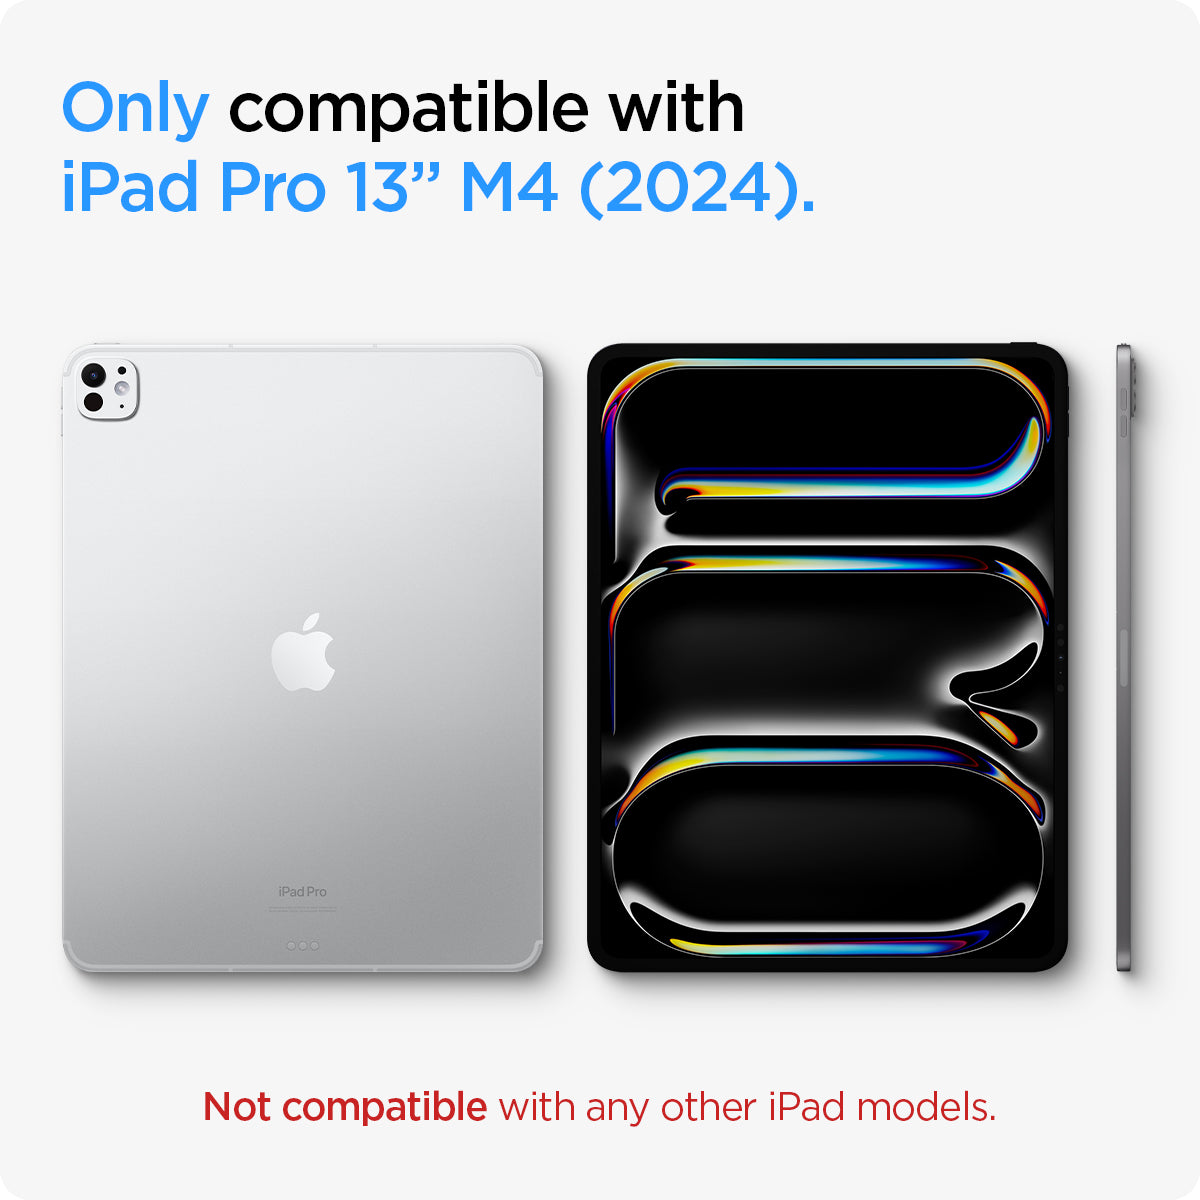 AGL07794 - Only compatible with iPad Pro 13" M4 (2024). Not compatible with any other iPad models.